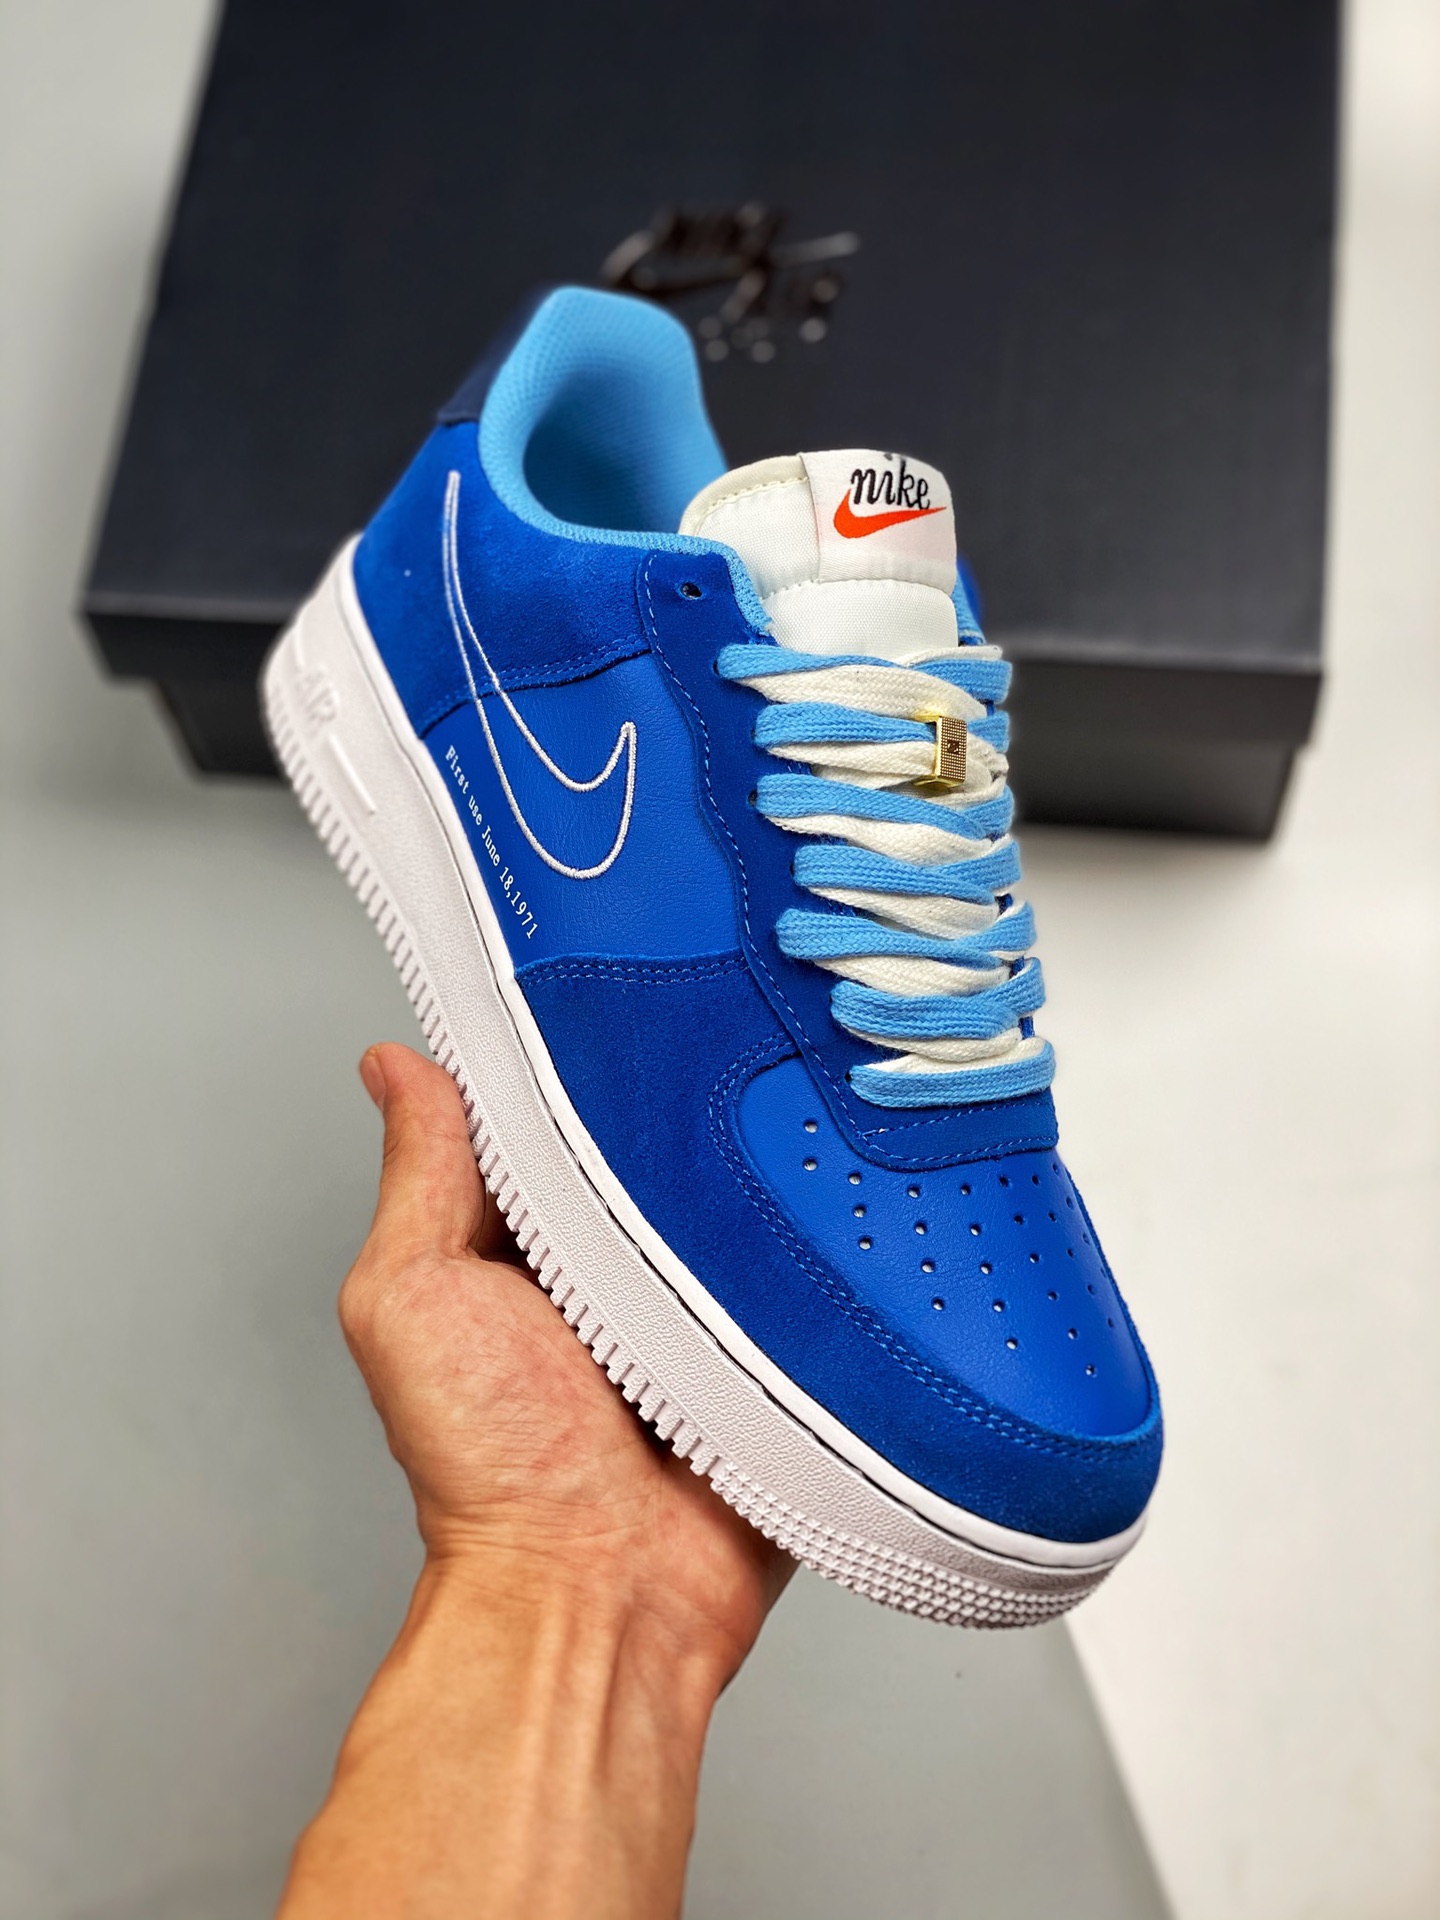 Nike Air AF Force 1 Low "First Use" University Blue/White Shoes